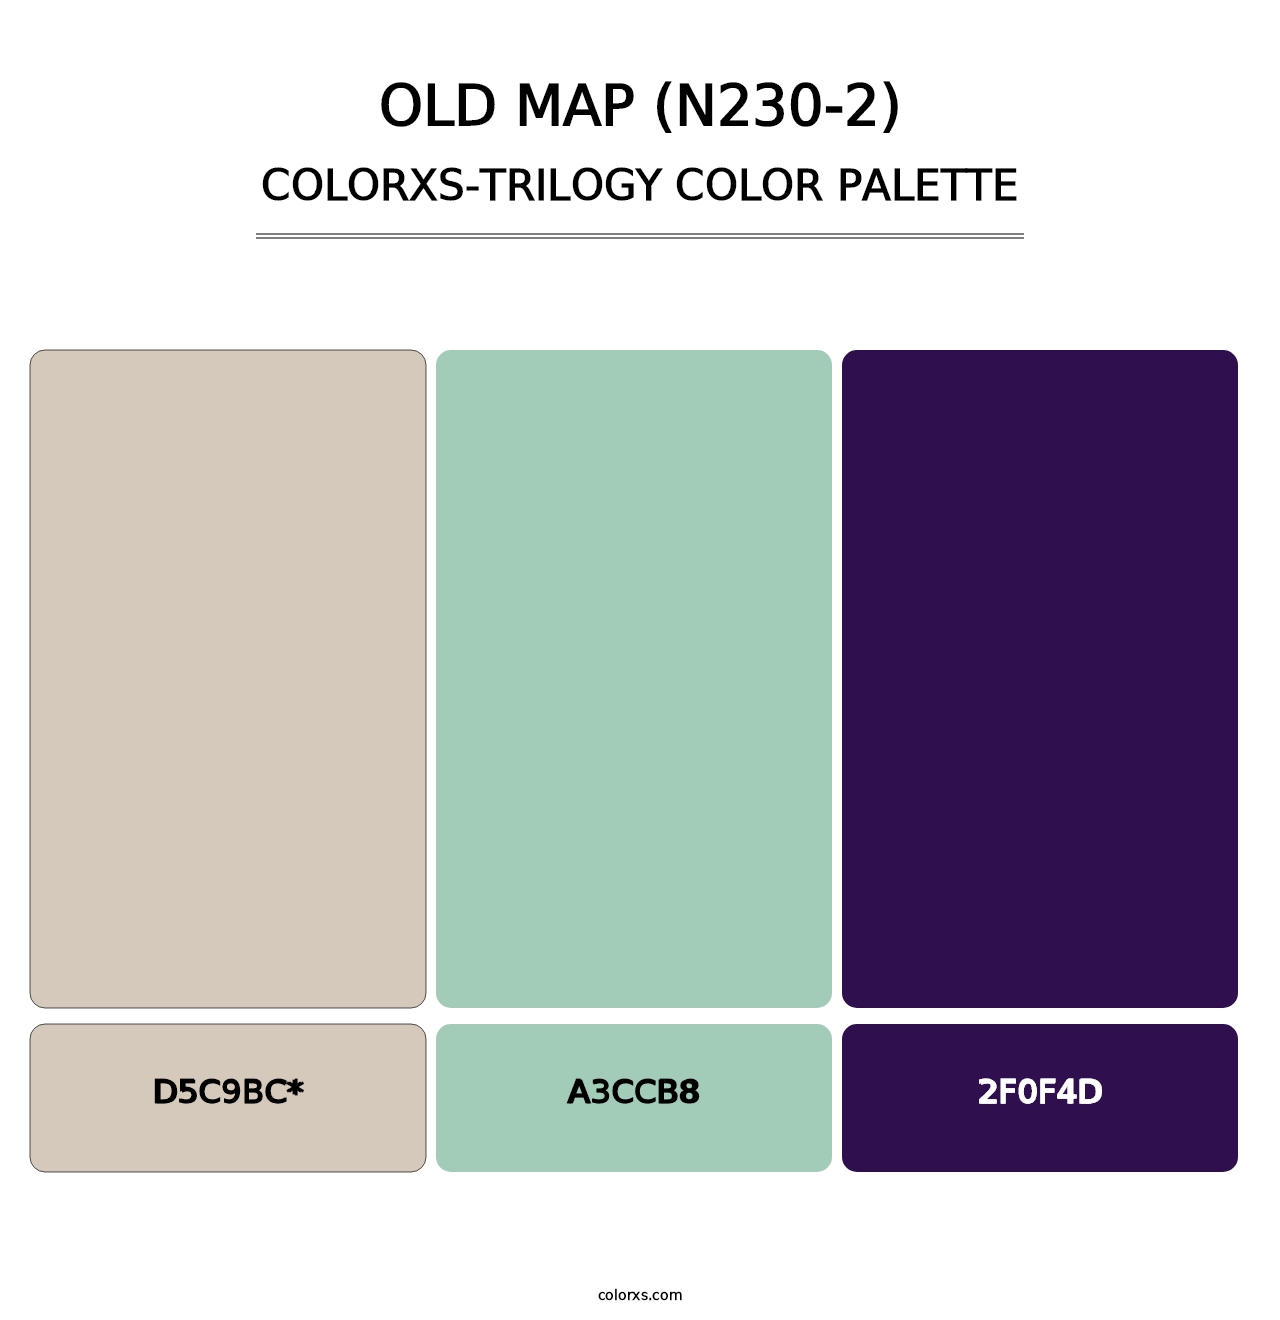 Old Map (N230-2) - Colorxs Trilogy Palette